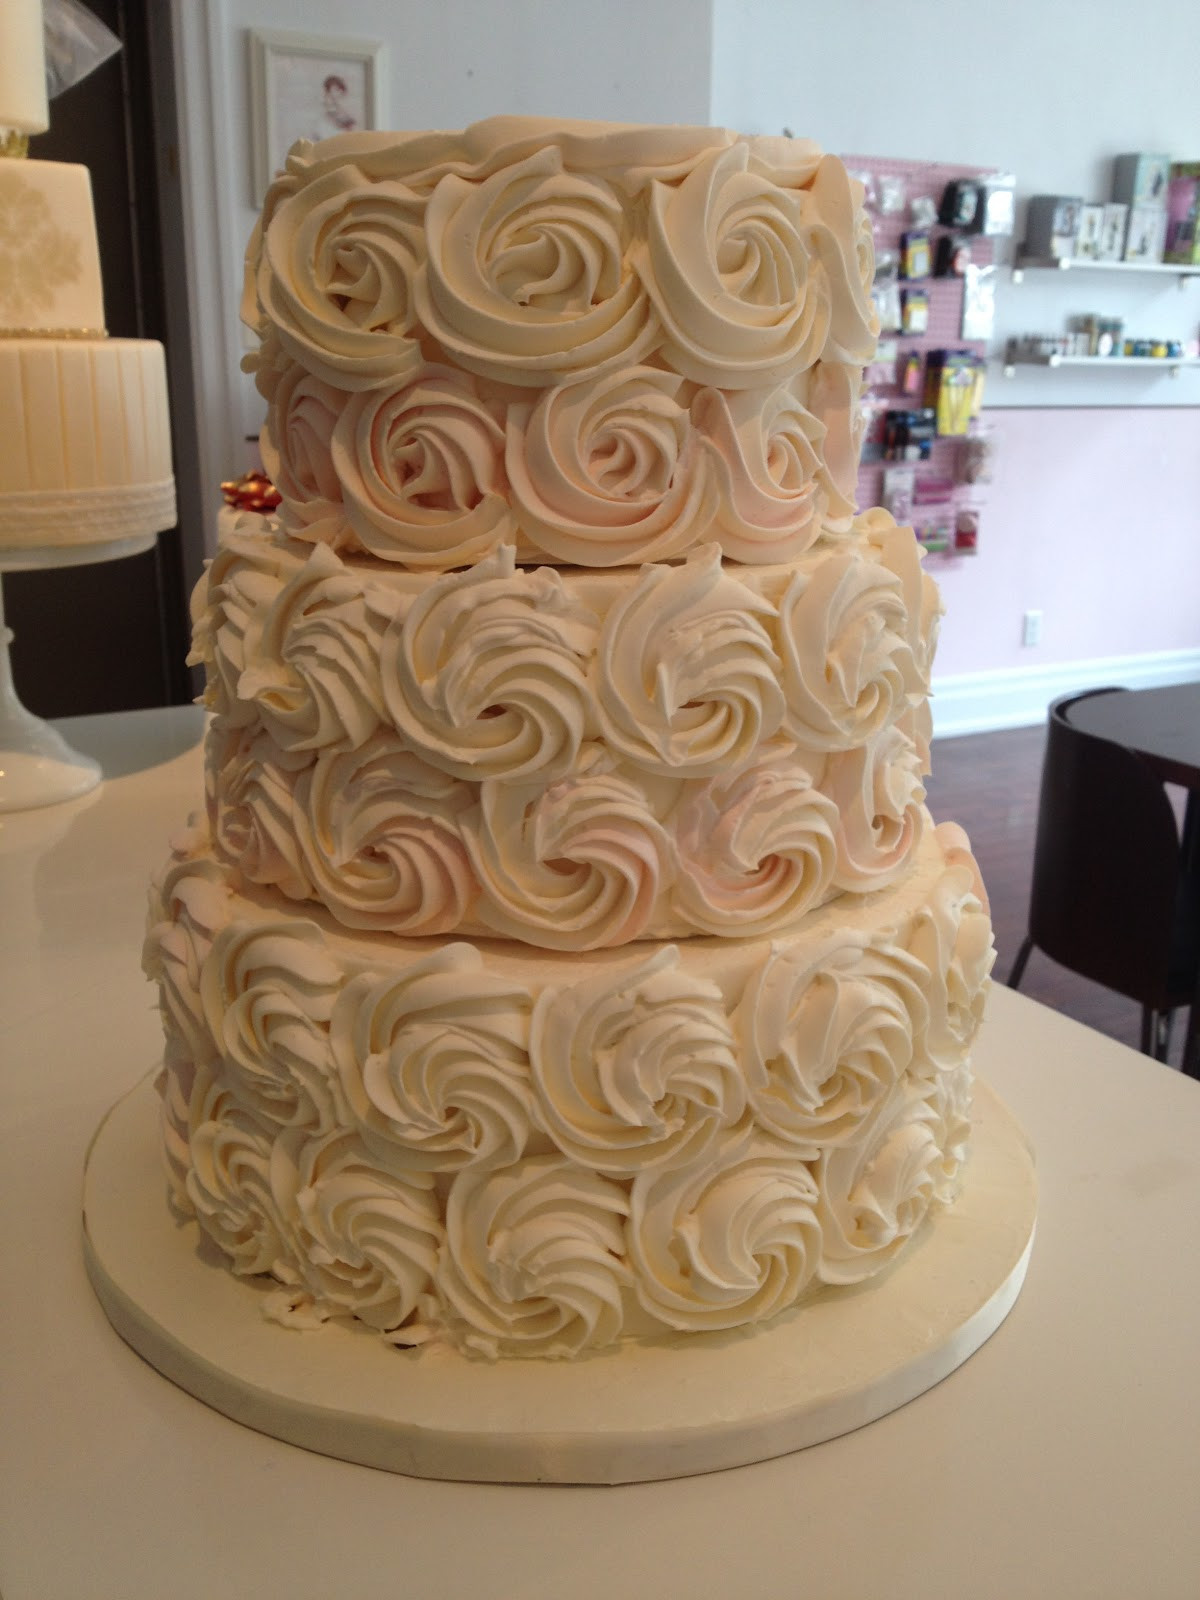 Wedding Cakes With Buttercream Frosting
 The Wedding Cake Shoppe Buttercream Cakes Have made a